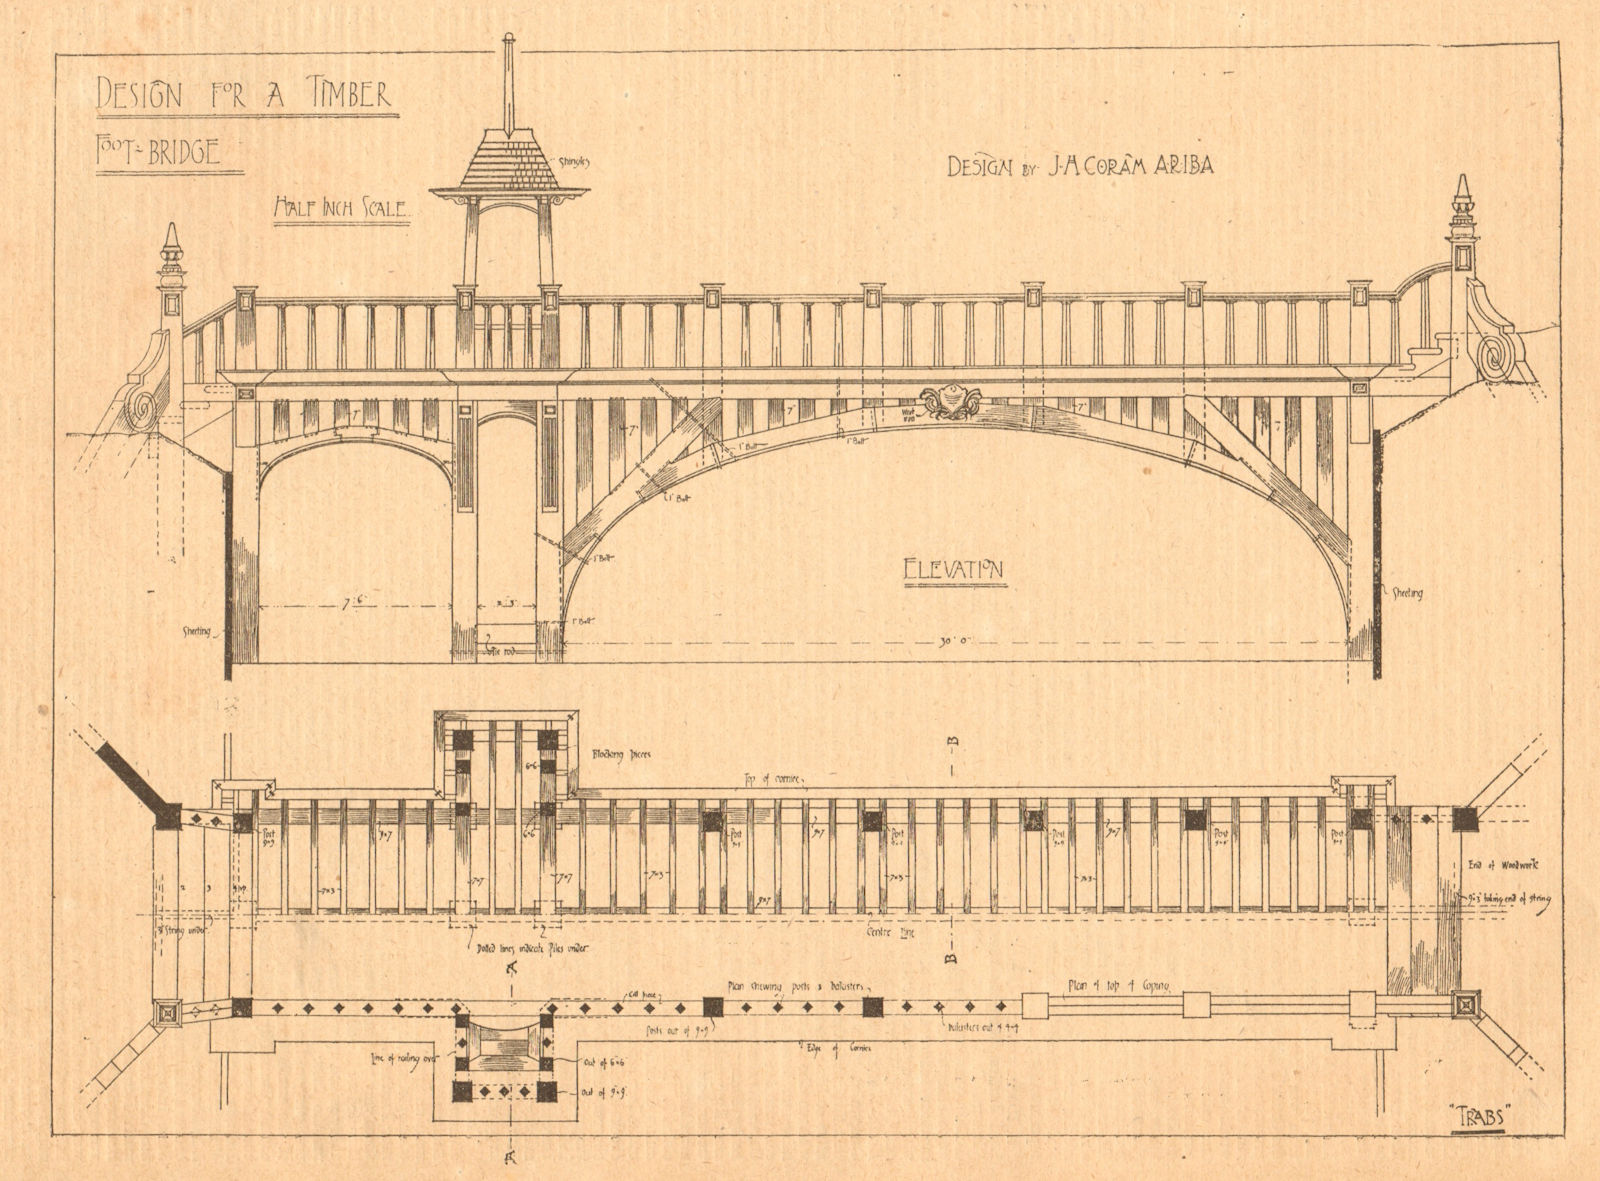 Associate Product Design for a timber foot bridge by J.H. Coram, ARIBA Elevation & plan 1901